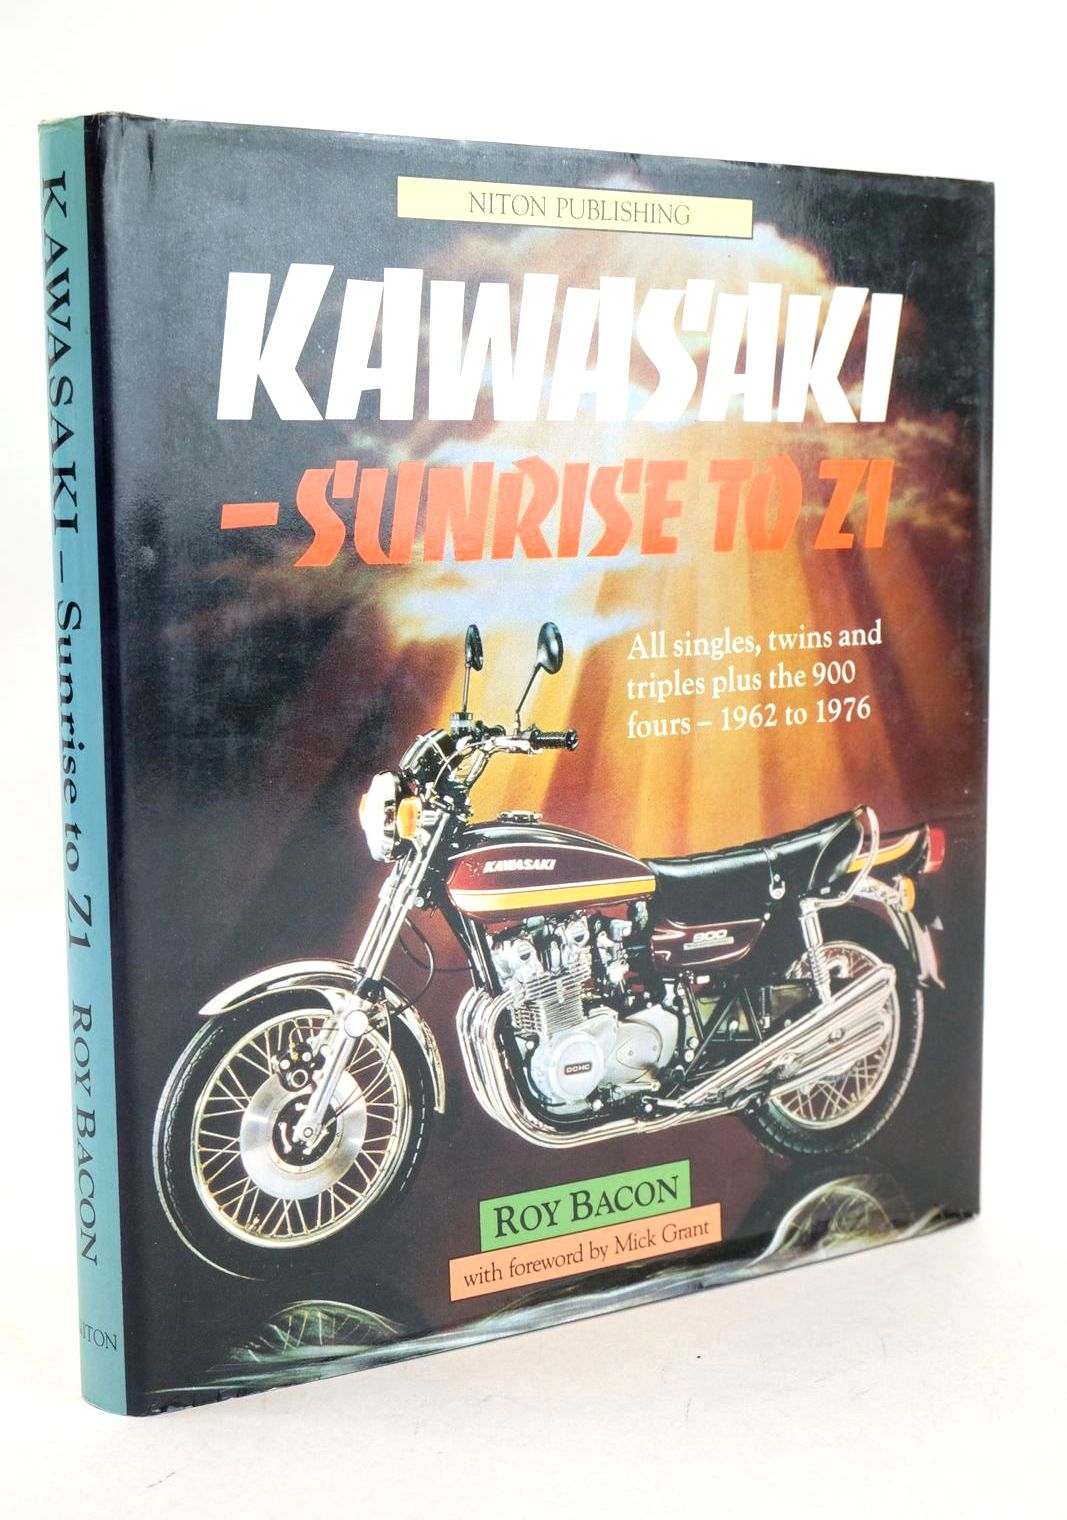 Photo of KAWASAKI SUNRISE TO Z1 written by Bacon, Roy published by Niton Publishing (STOCK CODE: 1327053)  for sale by Stella & Rose's Books